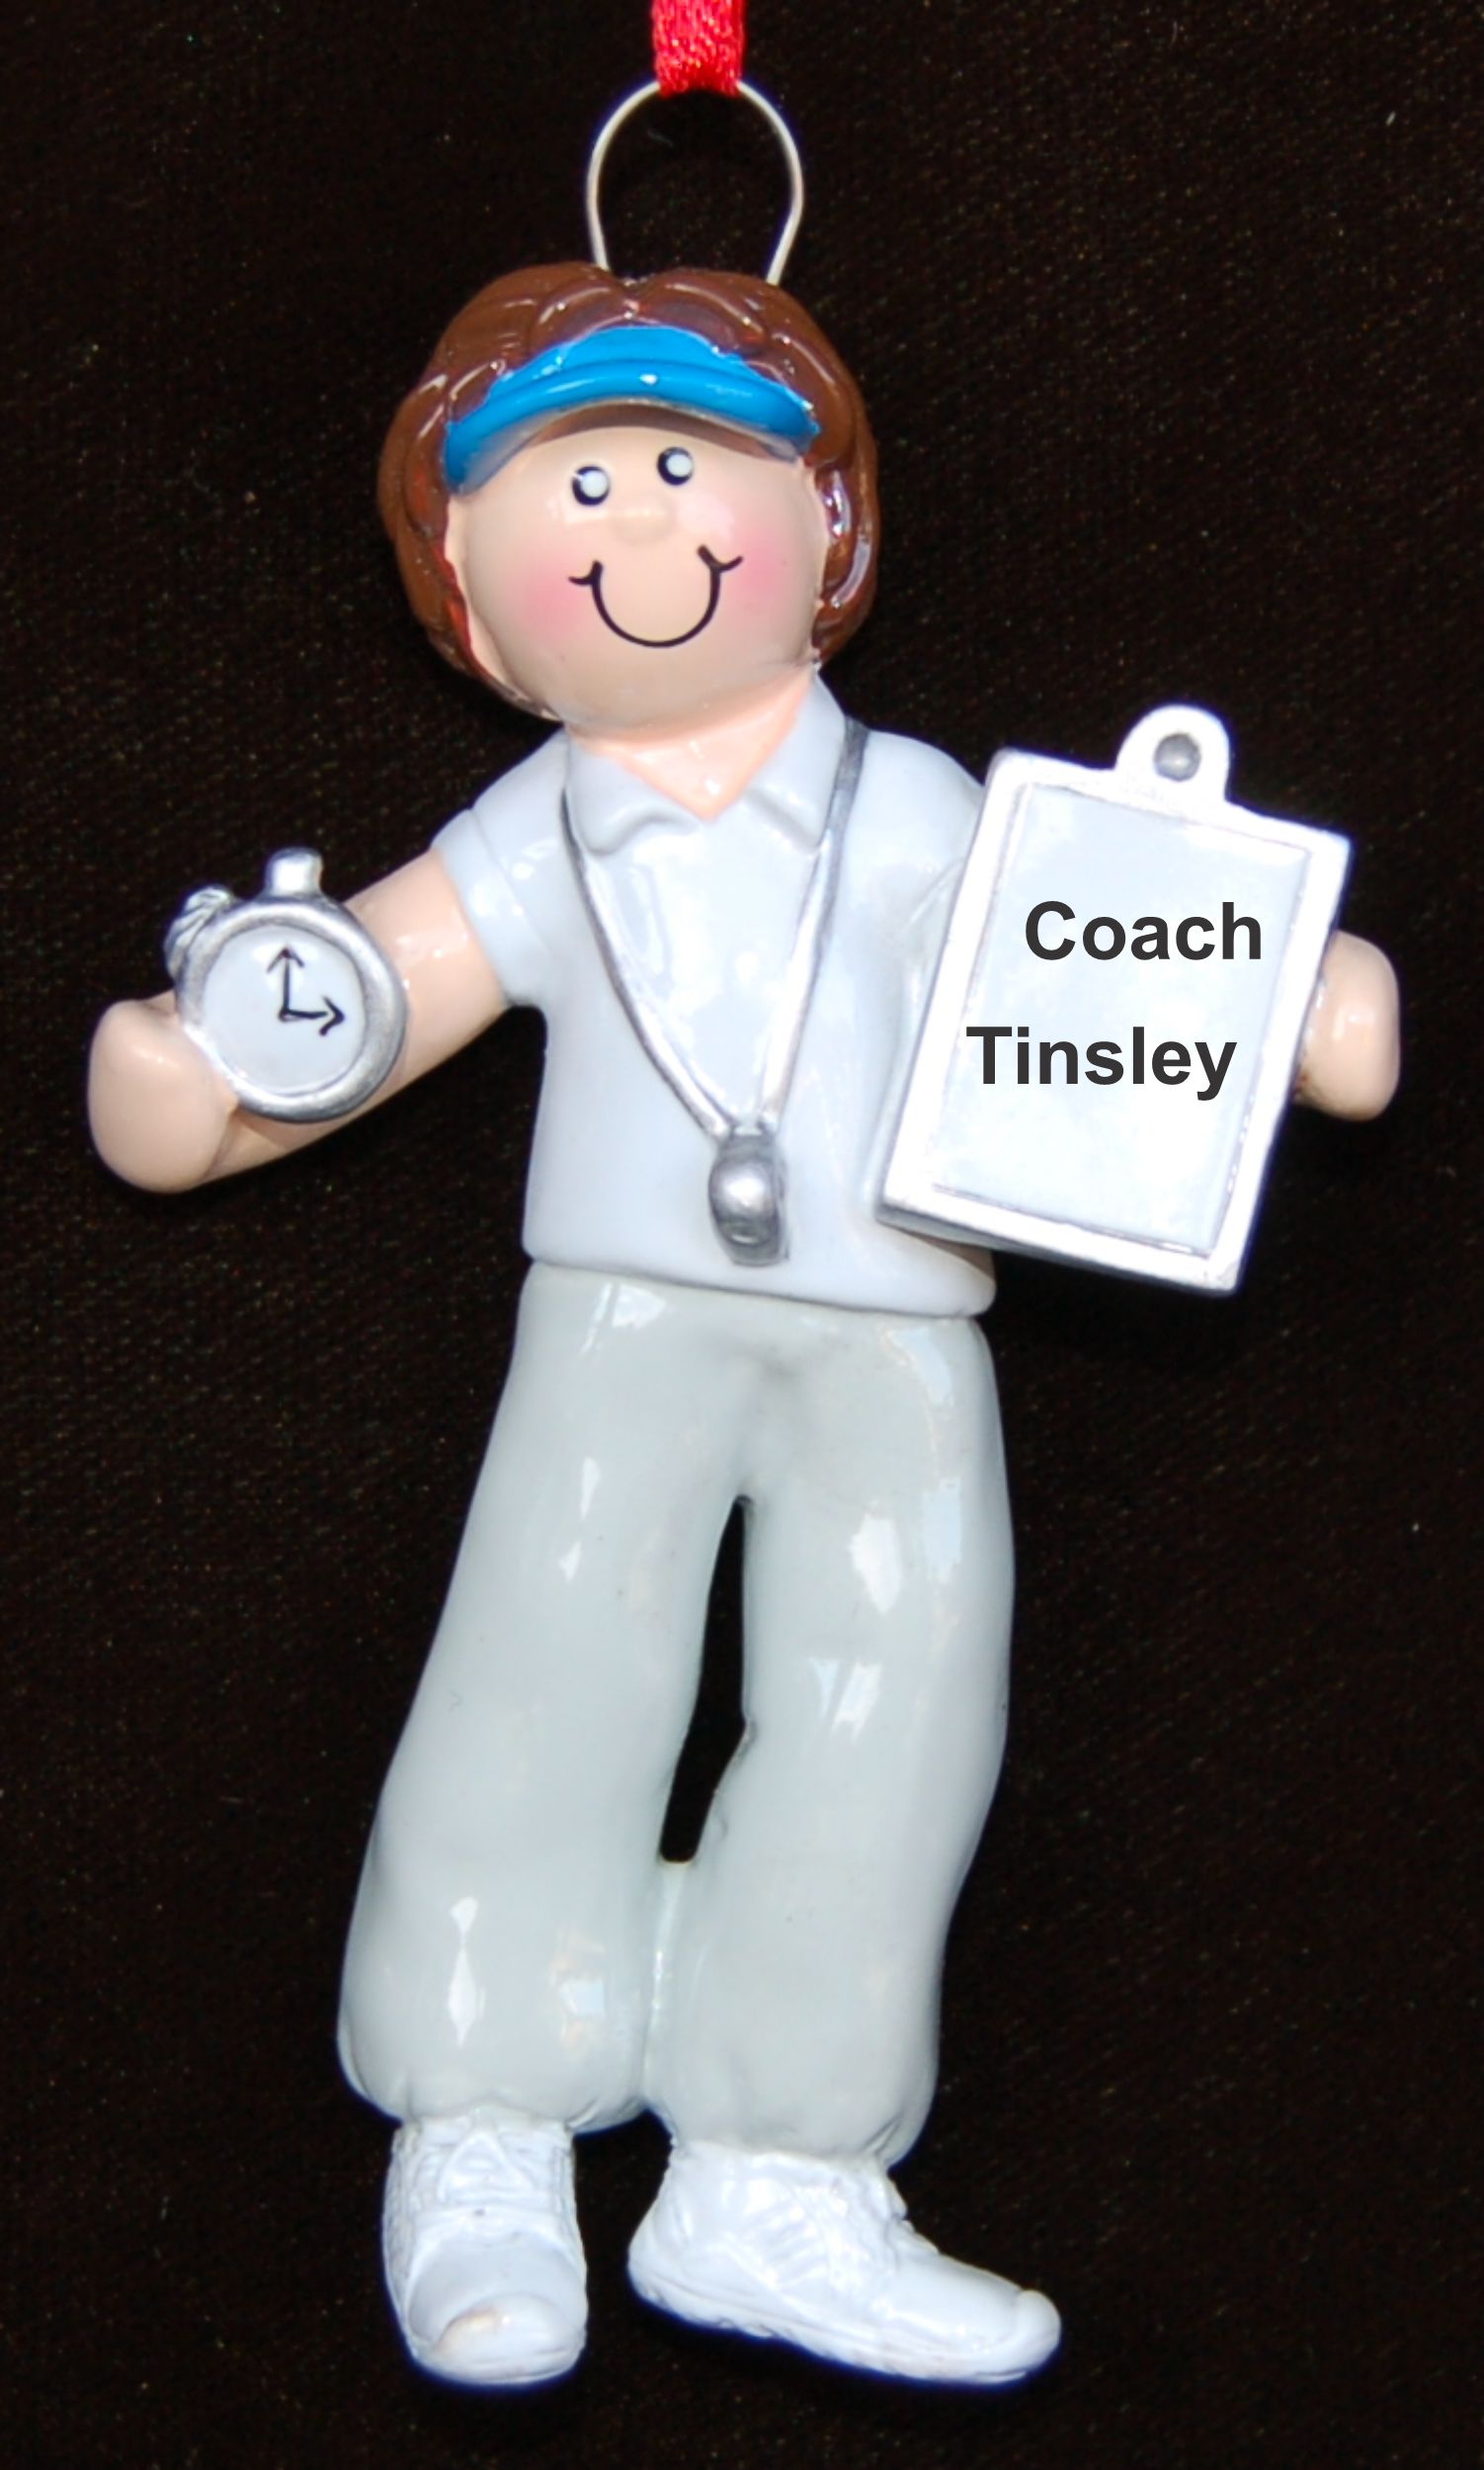 Coach Christmas Ornament Female Personalized by RussellRhodes.com